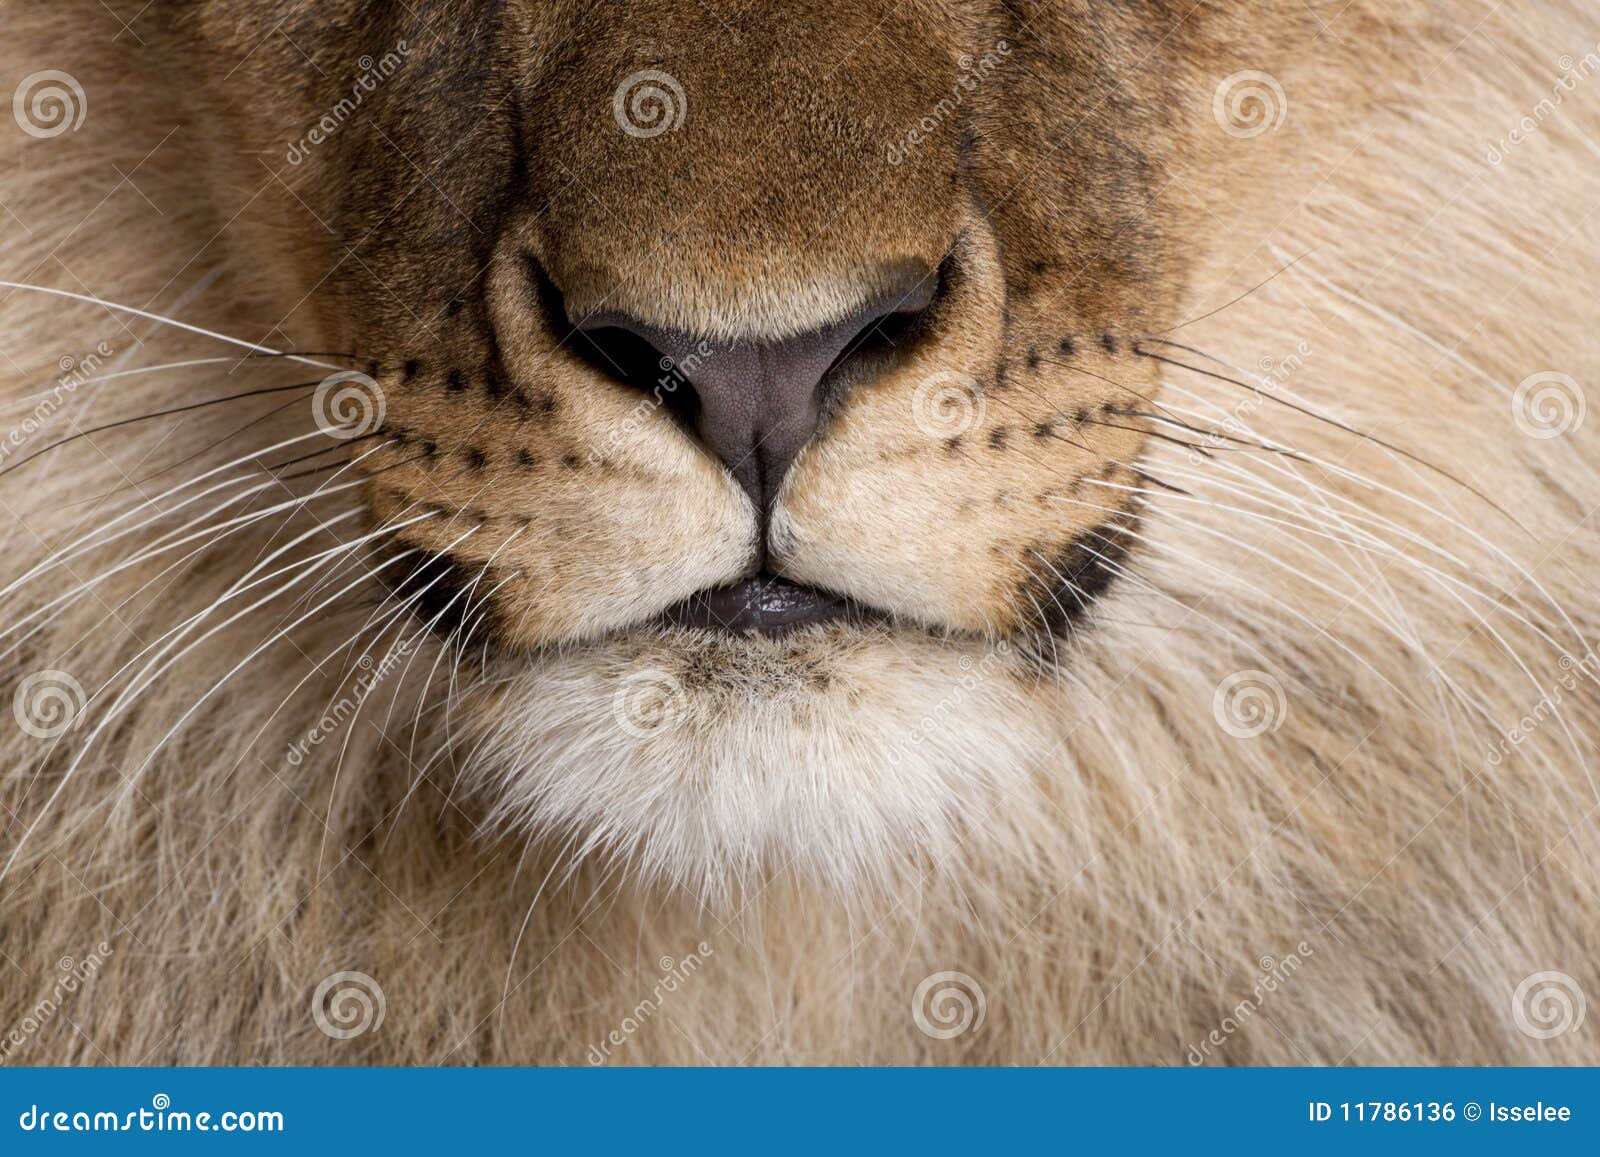 close-up of lion's nose and whiskers